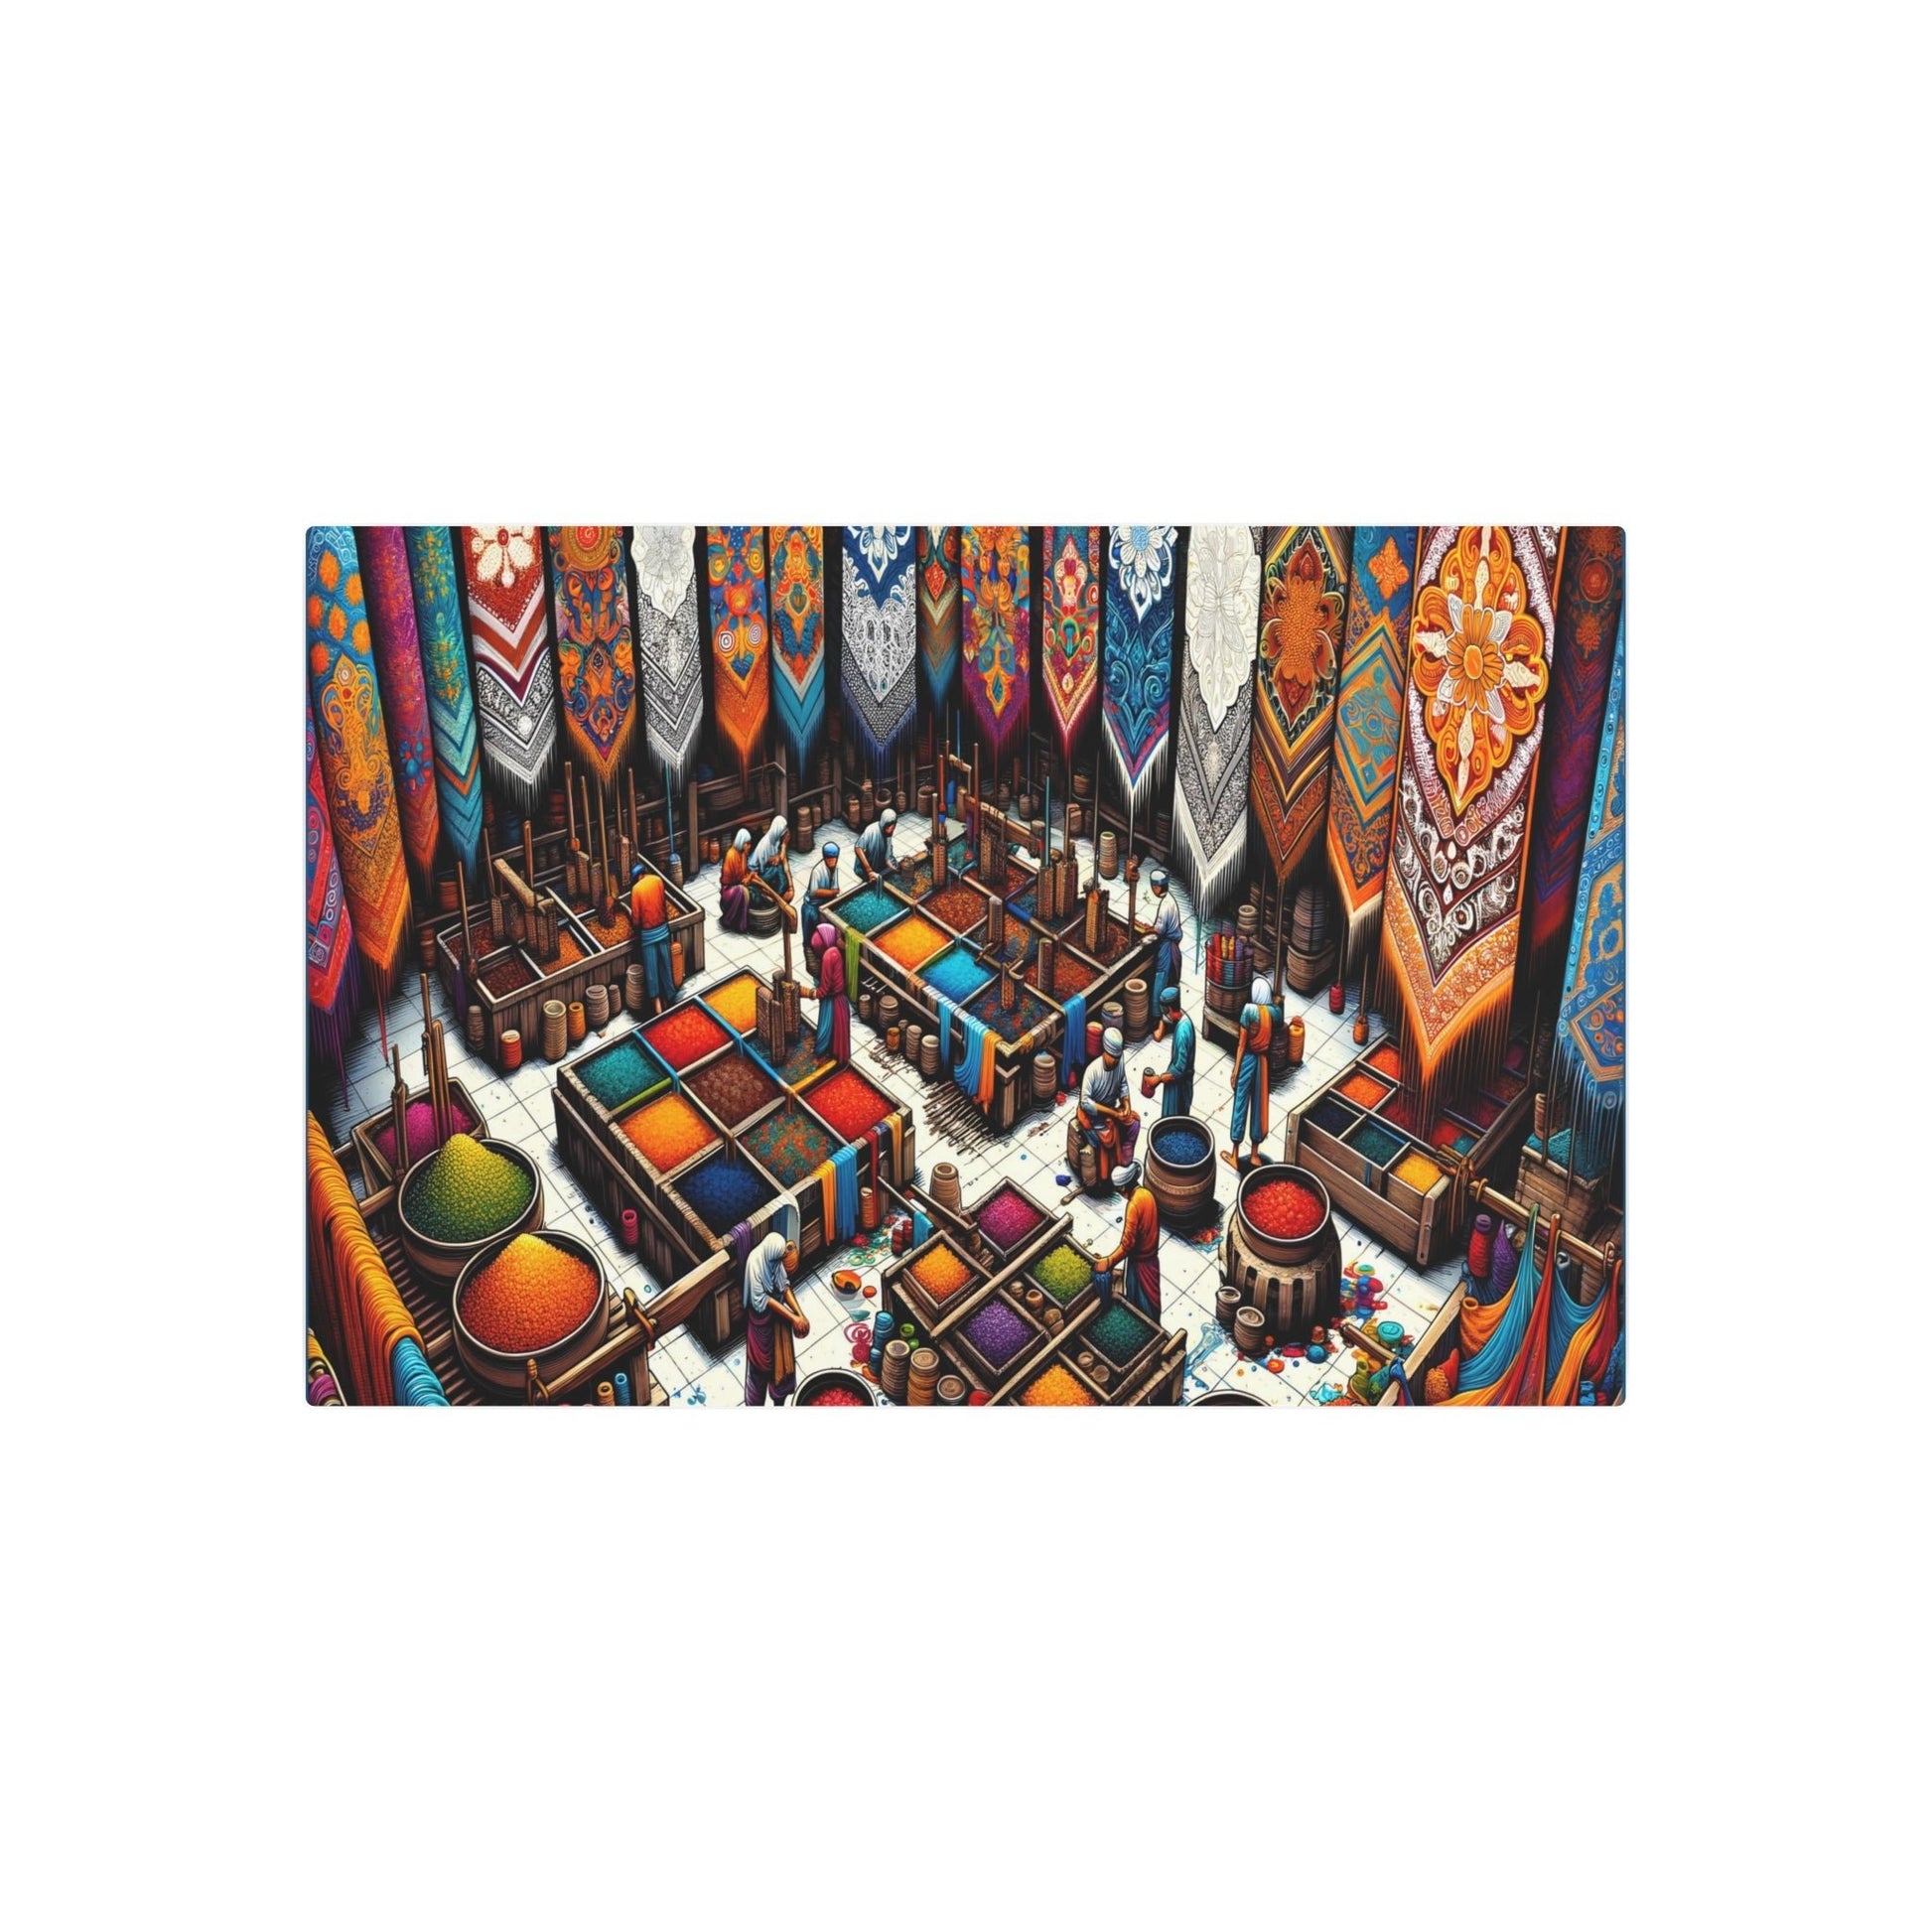 "Vibrant Indonesian Batik Art - Traditional Scene with Intricate Patterns in Global Styles Collection" - Metal Poster Art 36″ x 24″ (Horizontal) 0.12''